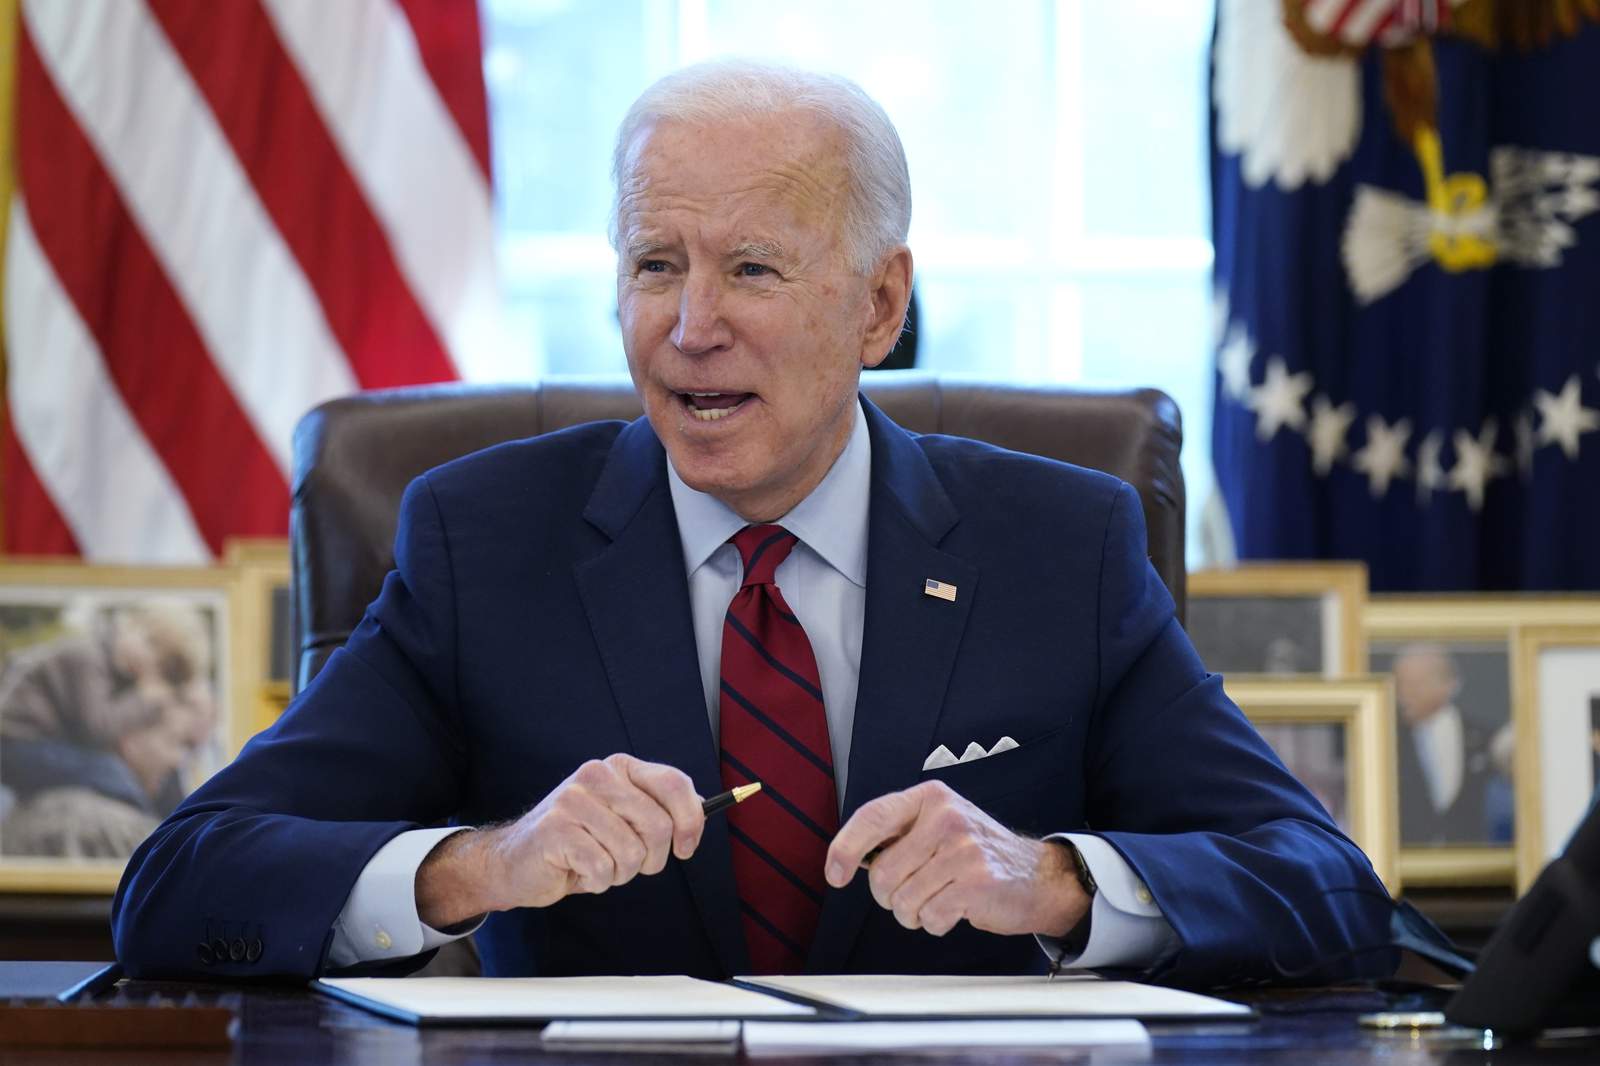 Activists fear Biden’s commitment to higher minimum wage